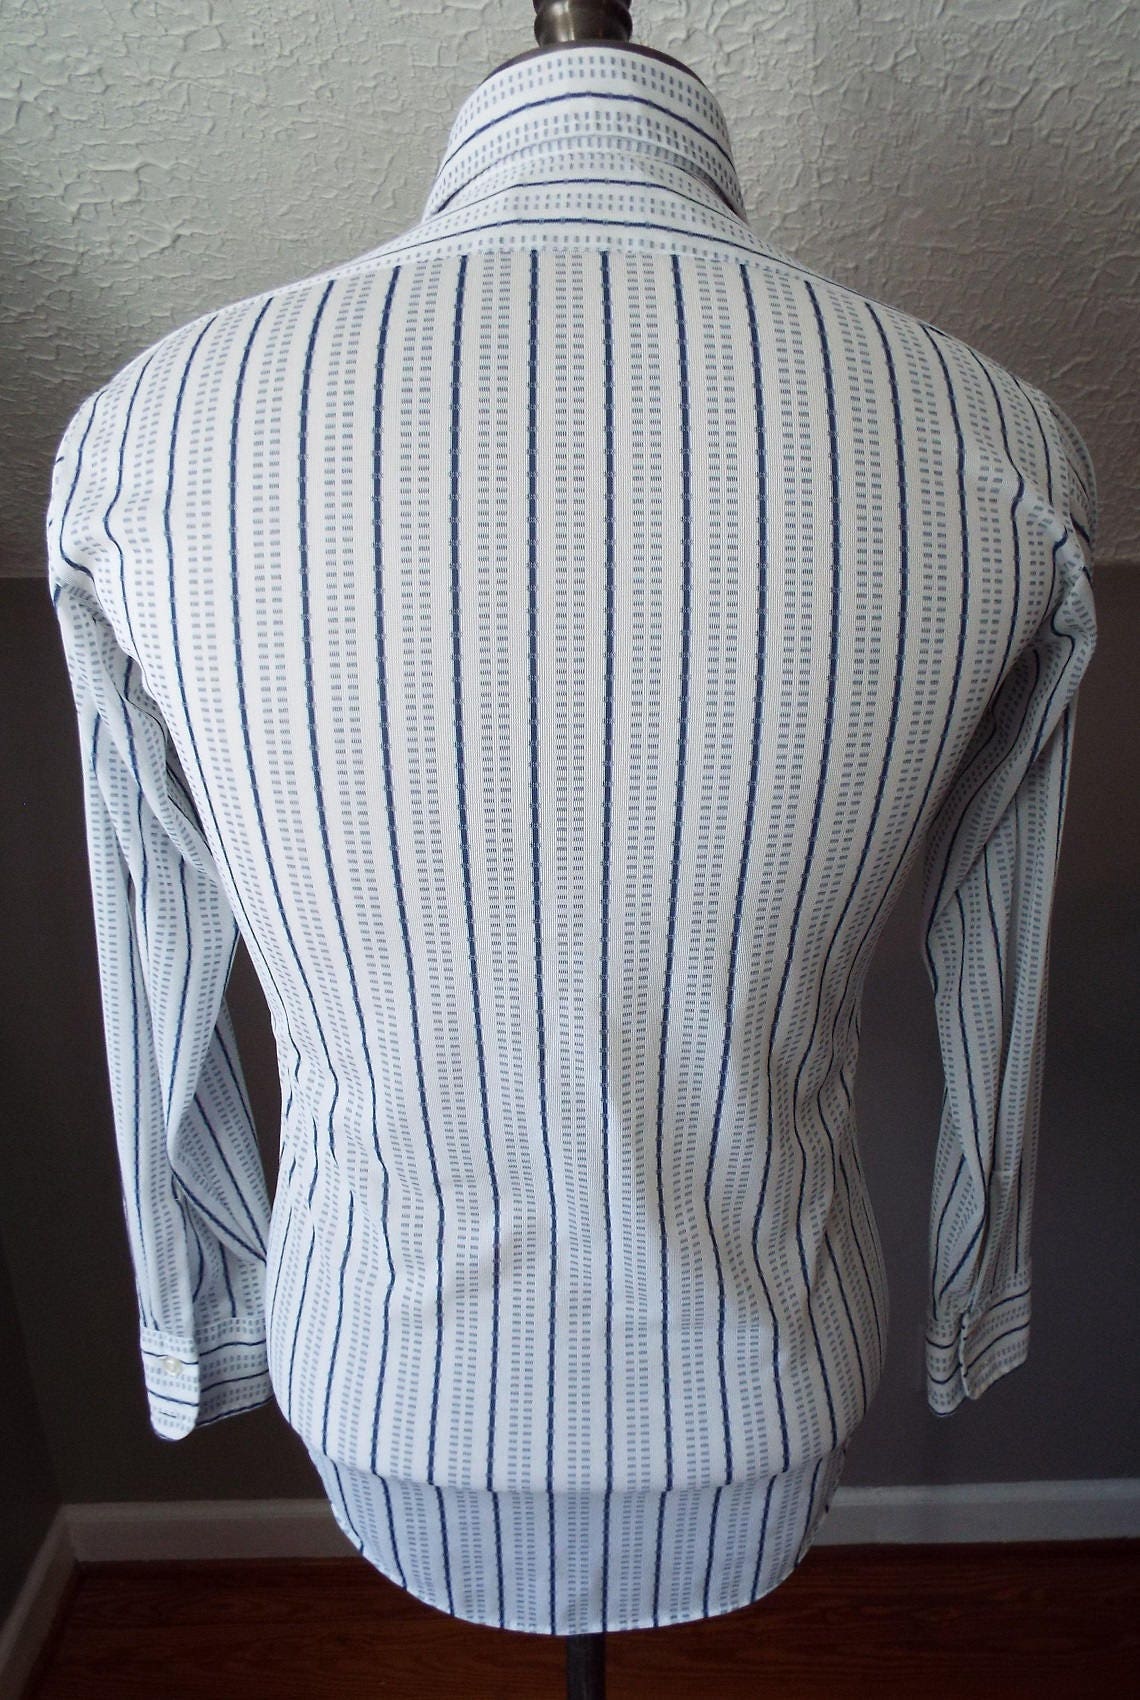 Vintage Button Down Long Sleeve Shirt by JC Penney Towncraft